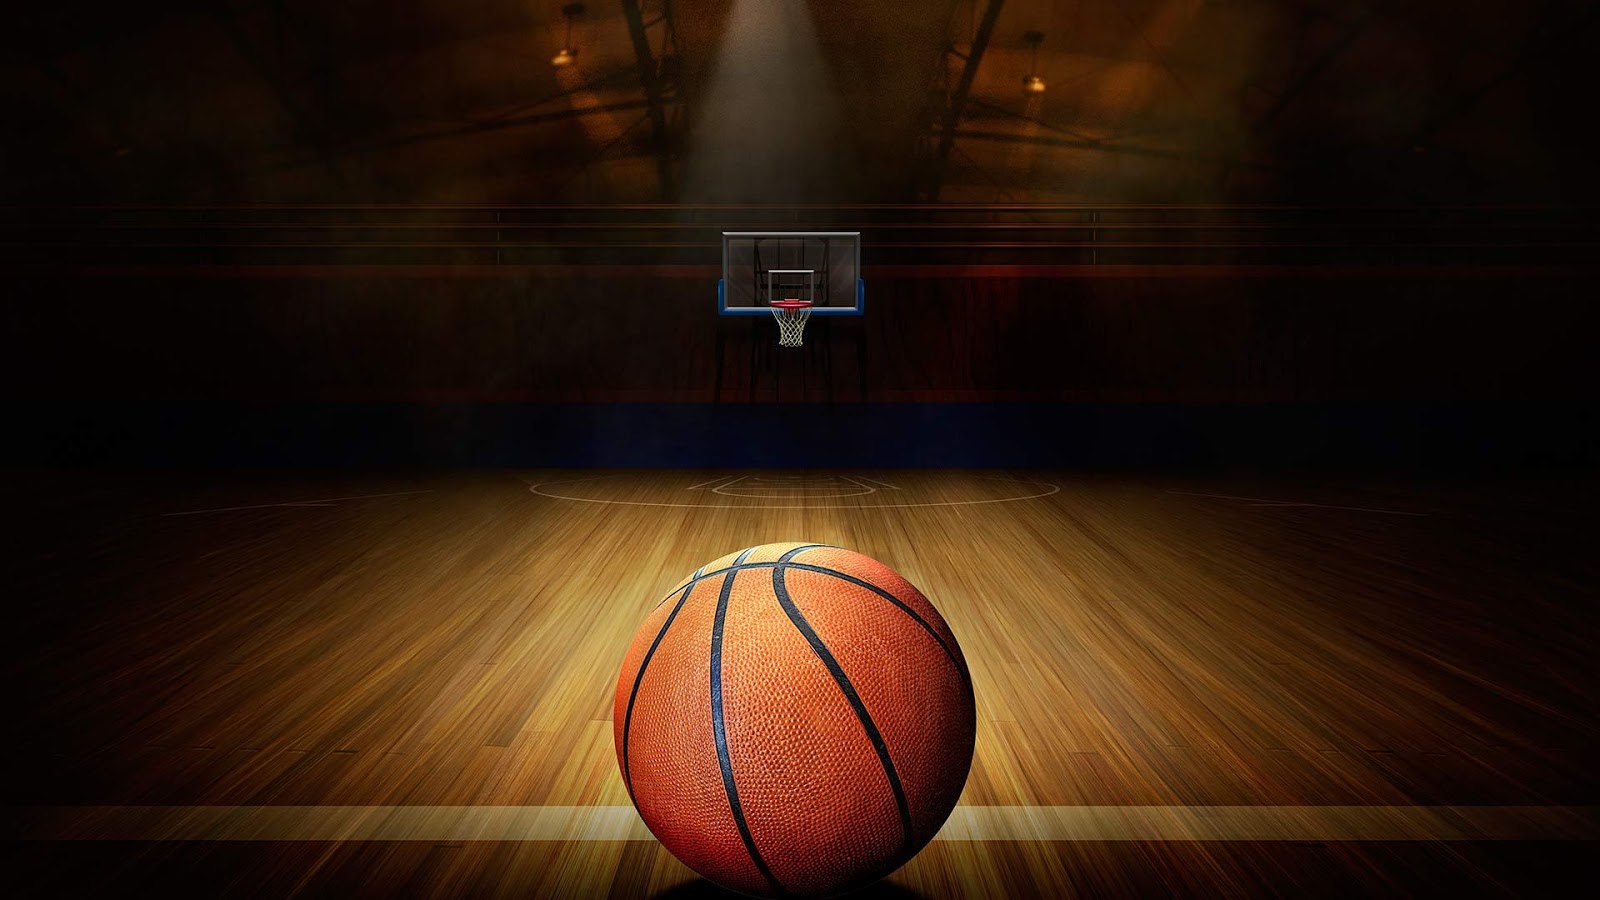 79 basketball background wallpaper Pictures